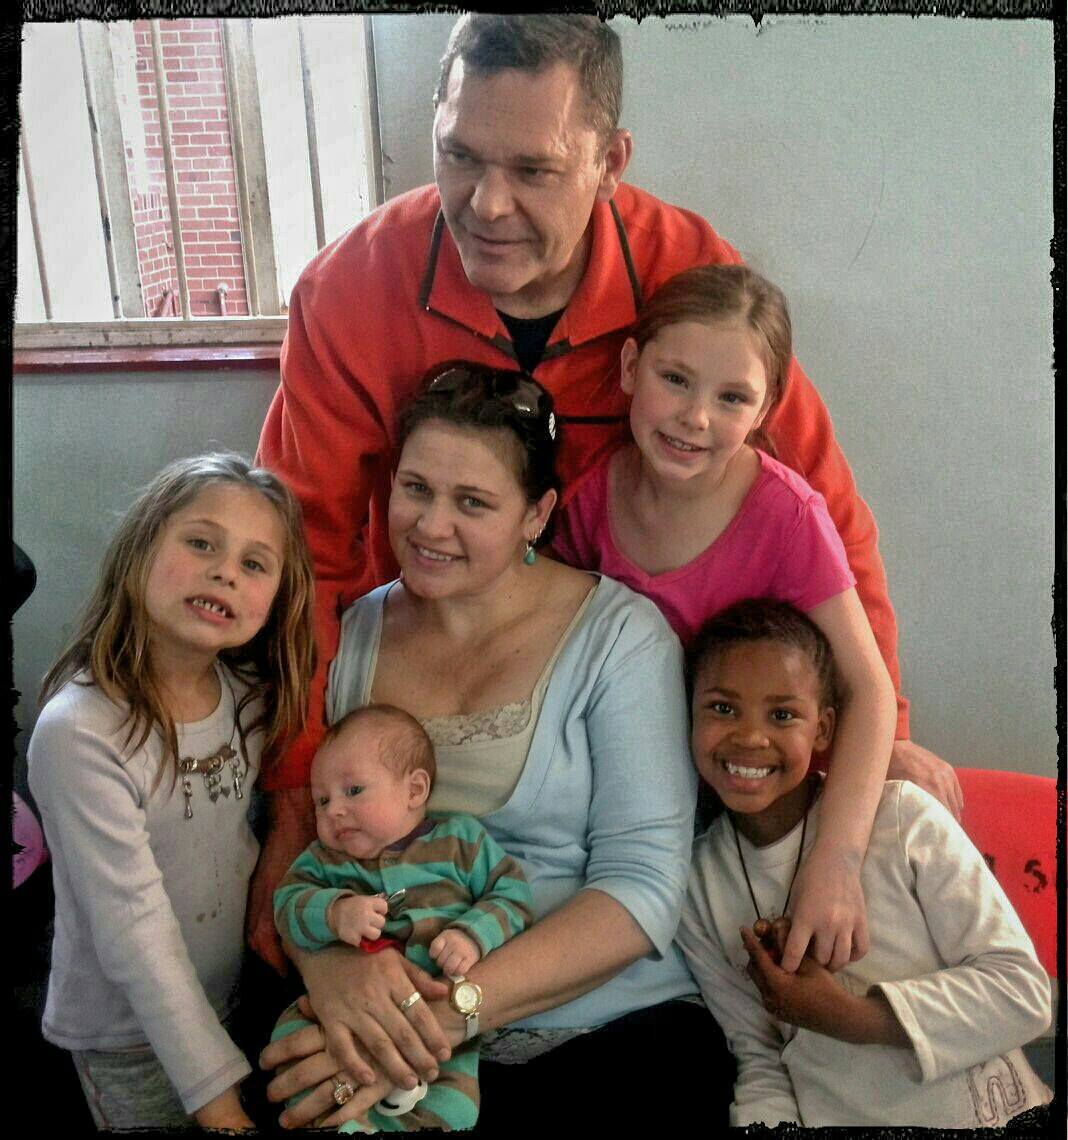 Our only family photo with Andries and baby Nuach (2months). This was taken in hospital on his 46th birthday, 2 weeks before his death.